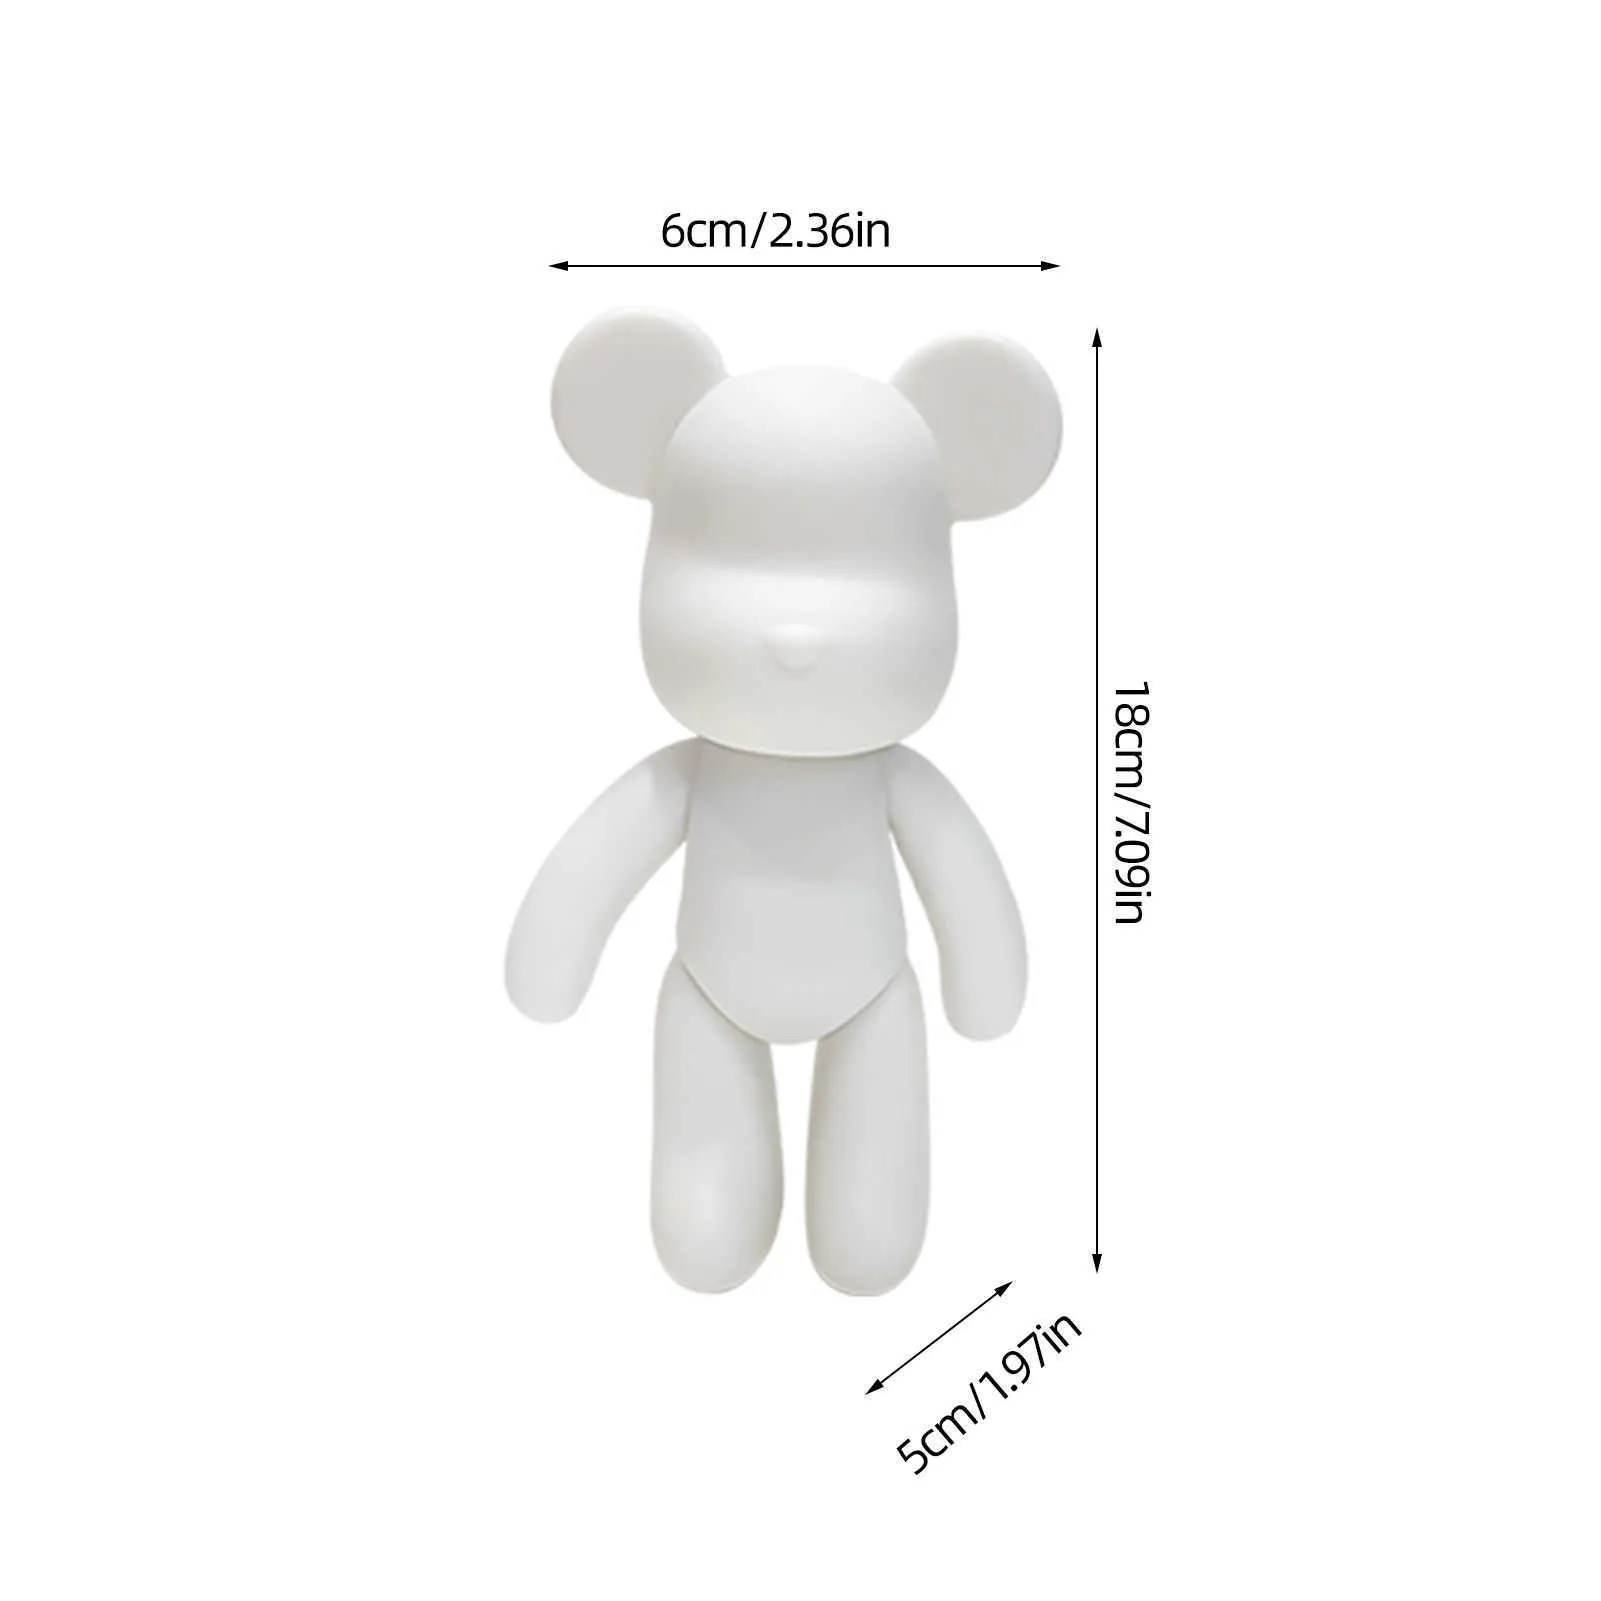 Handmade Fluid Bear Sculpture Teddy Bear Craft DIY Painting Of Violence Bear  With White Body Perfect For Home Room Decor From Mhck, $6.89